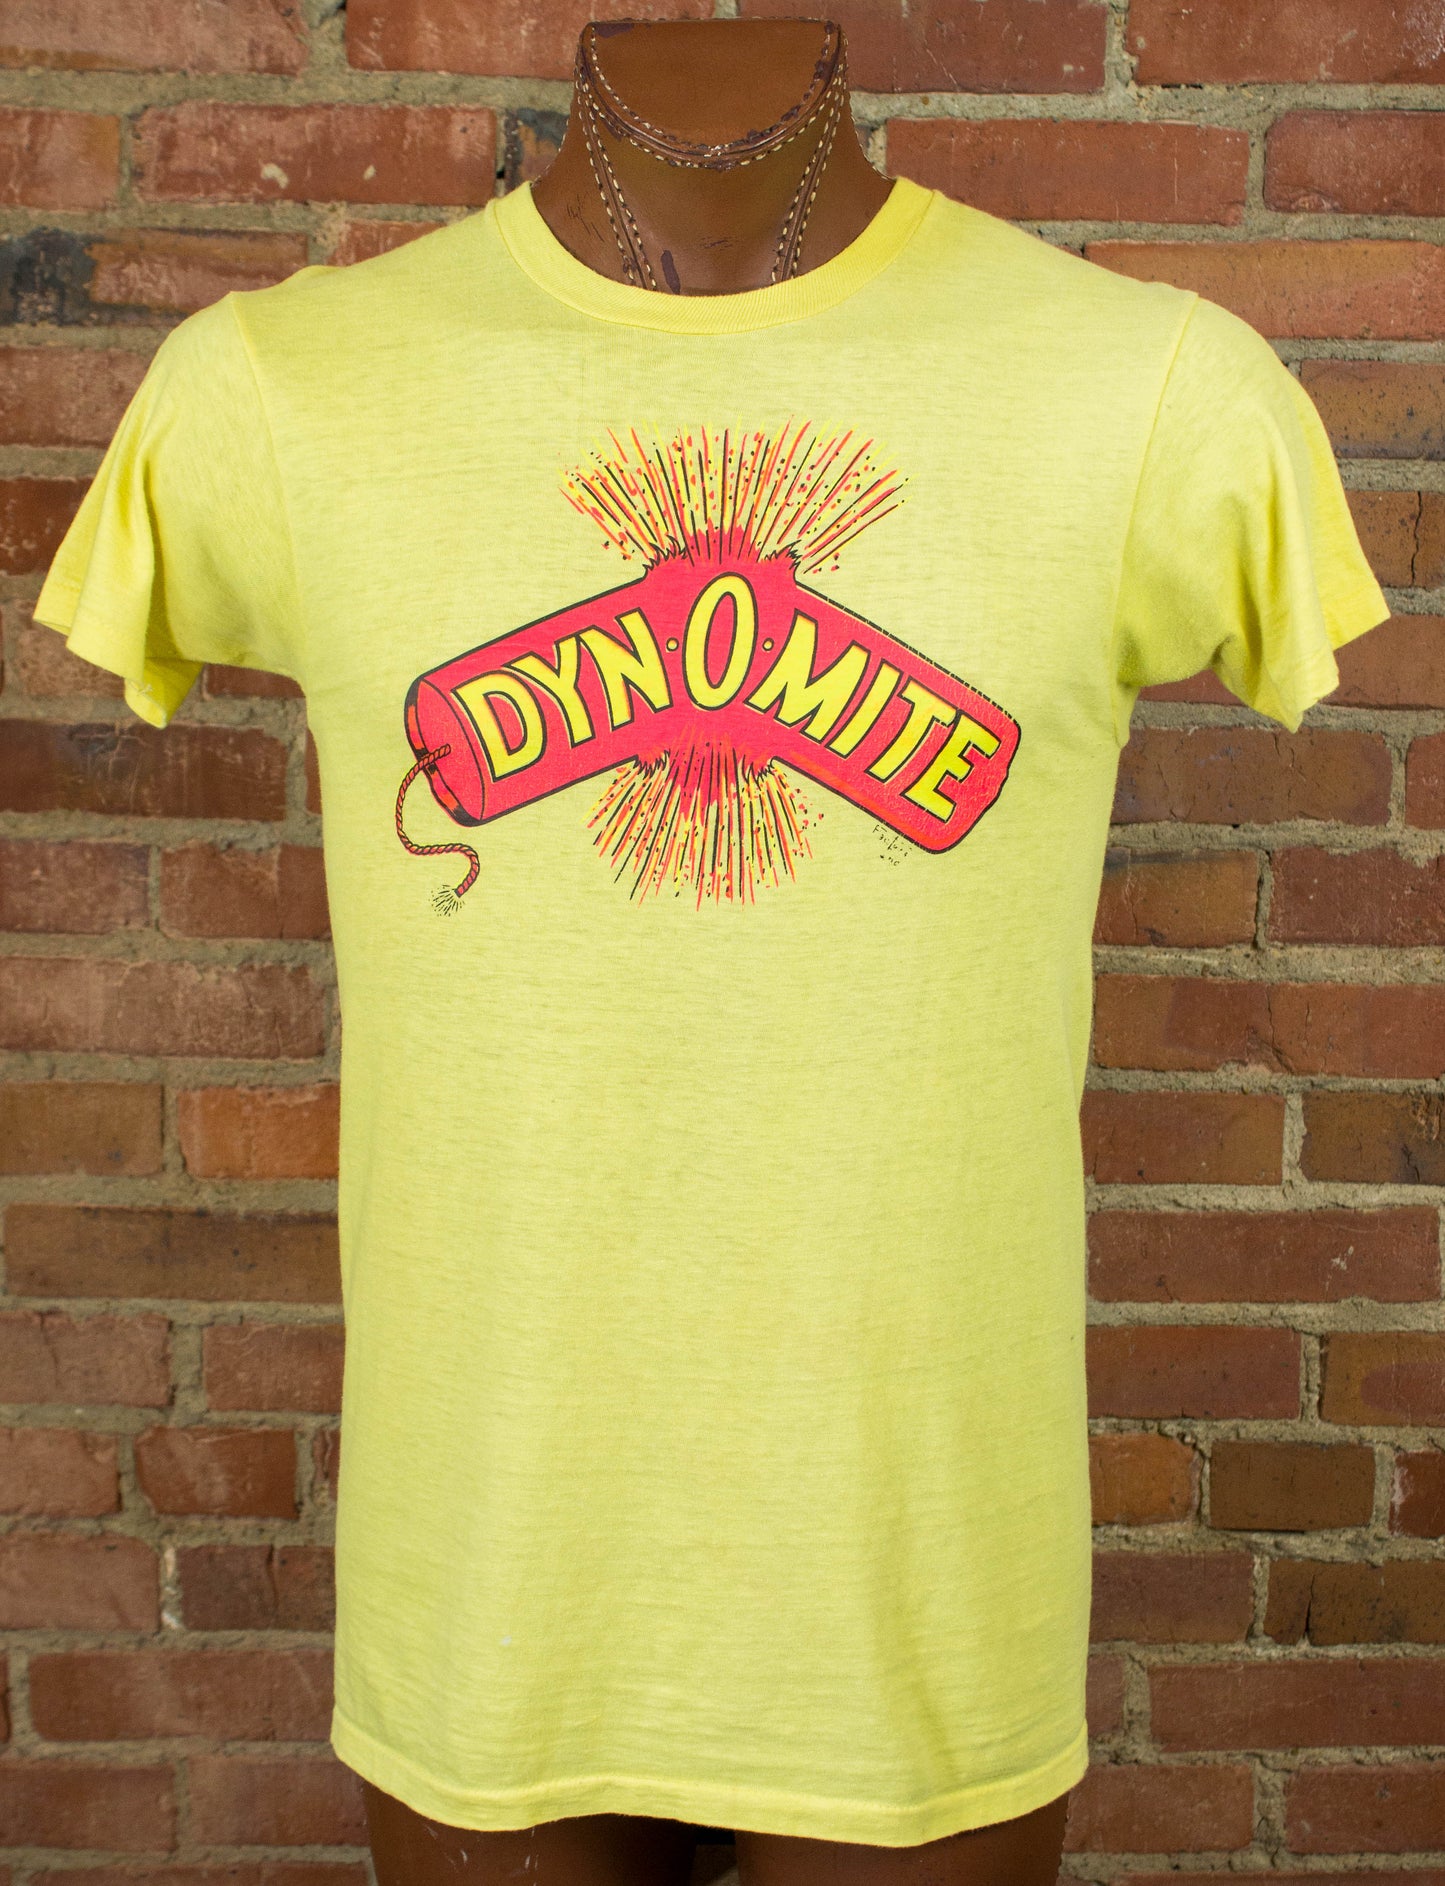 Vintage Dynomite Iron On Graphic T Shirt 70s Jimmie Walker Good Times Yellow Medium